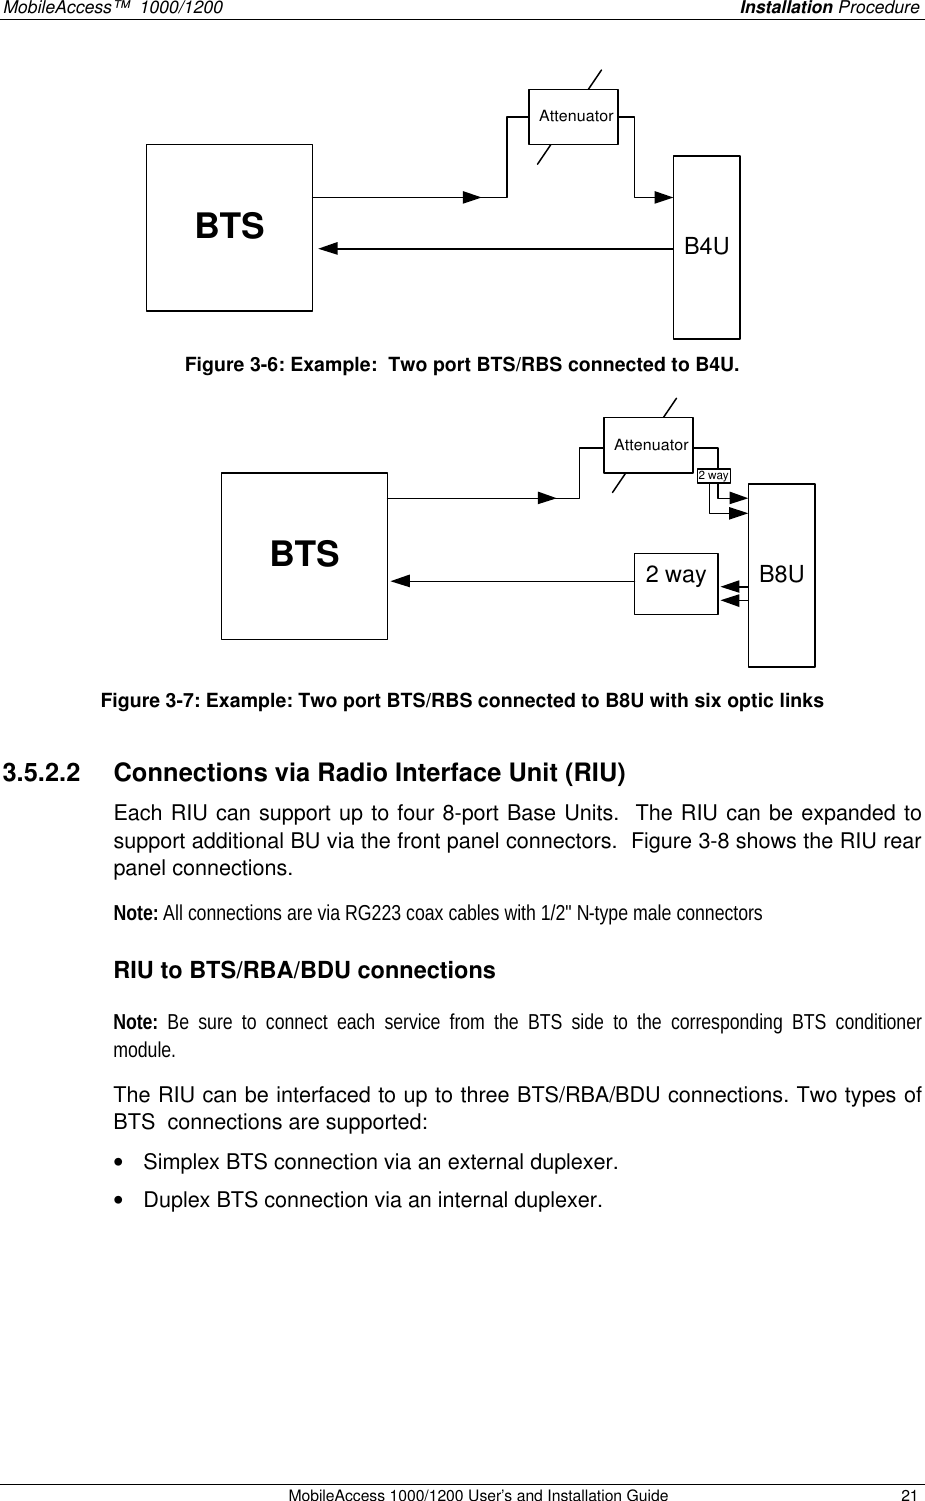 MobileAccess™  1000/1200    Installation Procedure  MobileAccess 1000/1200 User’s and Installation Guide 21     BTSAttenuatorB4U Figure 3-6: Example:  Two port BTS/RBS connected to B4U. BTS2 way B8UAttenuator2 way Figure 3-7: Example: Two port BTS/RBS connected to B8U with six optic links 3.5.2.2  Connections via Radio Interface Unit (RIU) Each RIU can support up to four 8-port Base Units.  The RIU can be expanded to support additional BU via the front panel connectors.  Figure 3-8 shows the RIU rear panel connections. Note: All connections are via RG223 coax cables with 1/2&quot; N-type male connectors RIU to BTS/RBA/BDU connections Note:  Be sure to connect each service from the BTS side to the corresponding BTS conditioner module. The RIU can be interfaced to up to three BTS/RBA/BDU connections. Two types of BTS  connections are supported:  • Simplex BTS connection via an external duplexer. • Duplex BTS connection via an internal duplexer. 